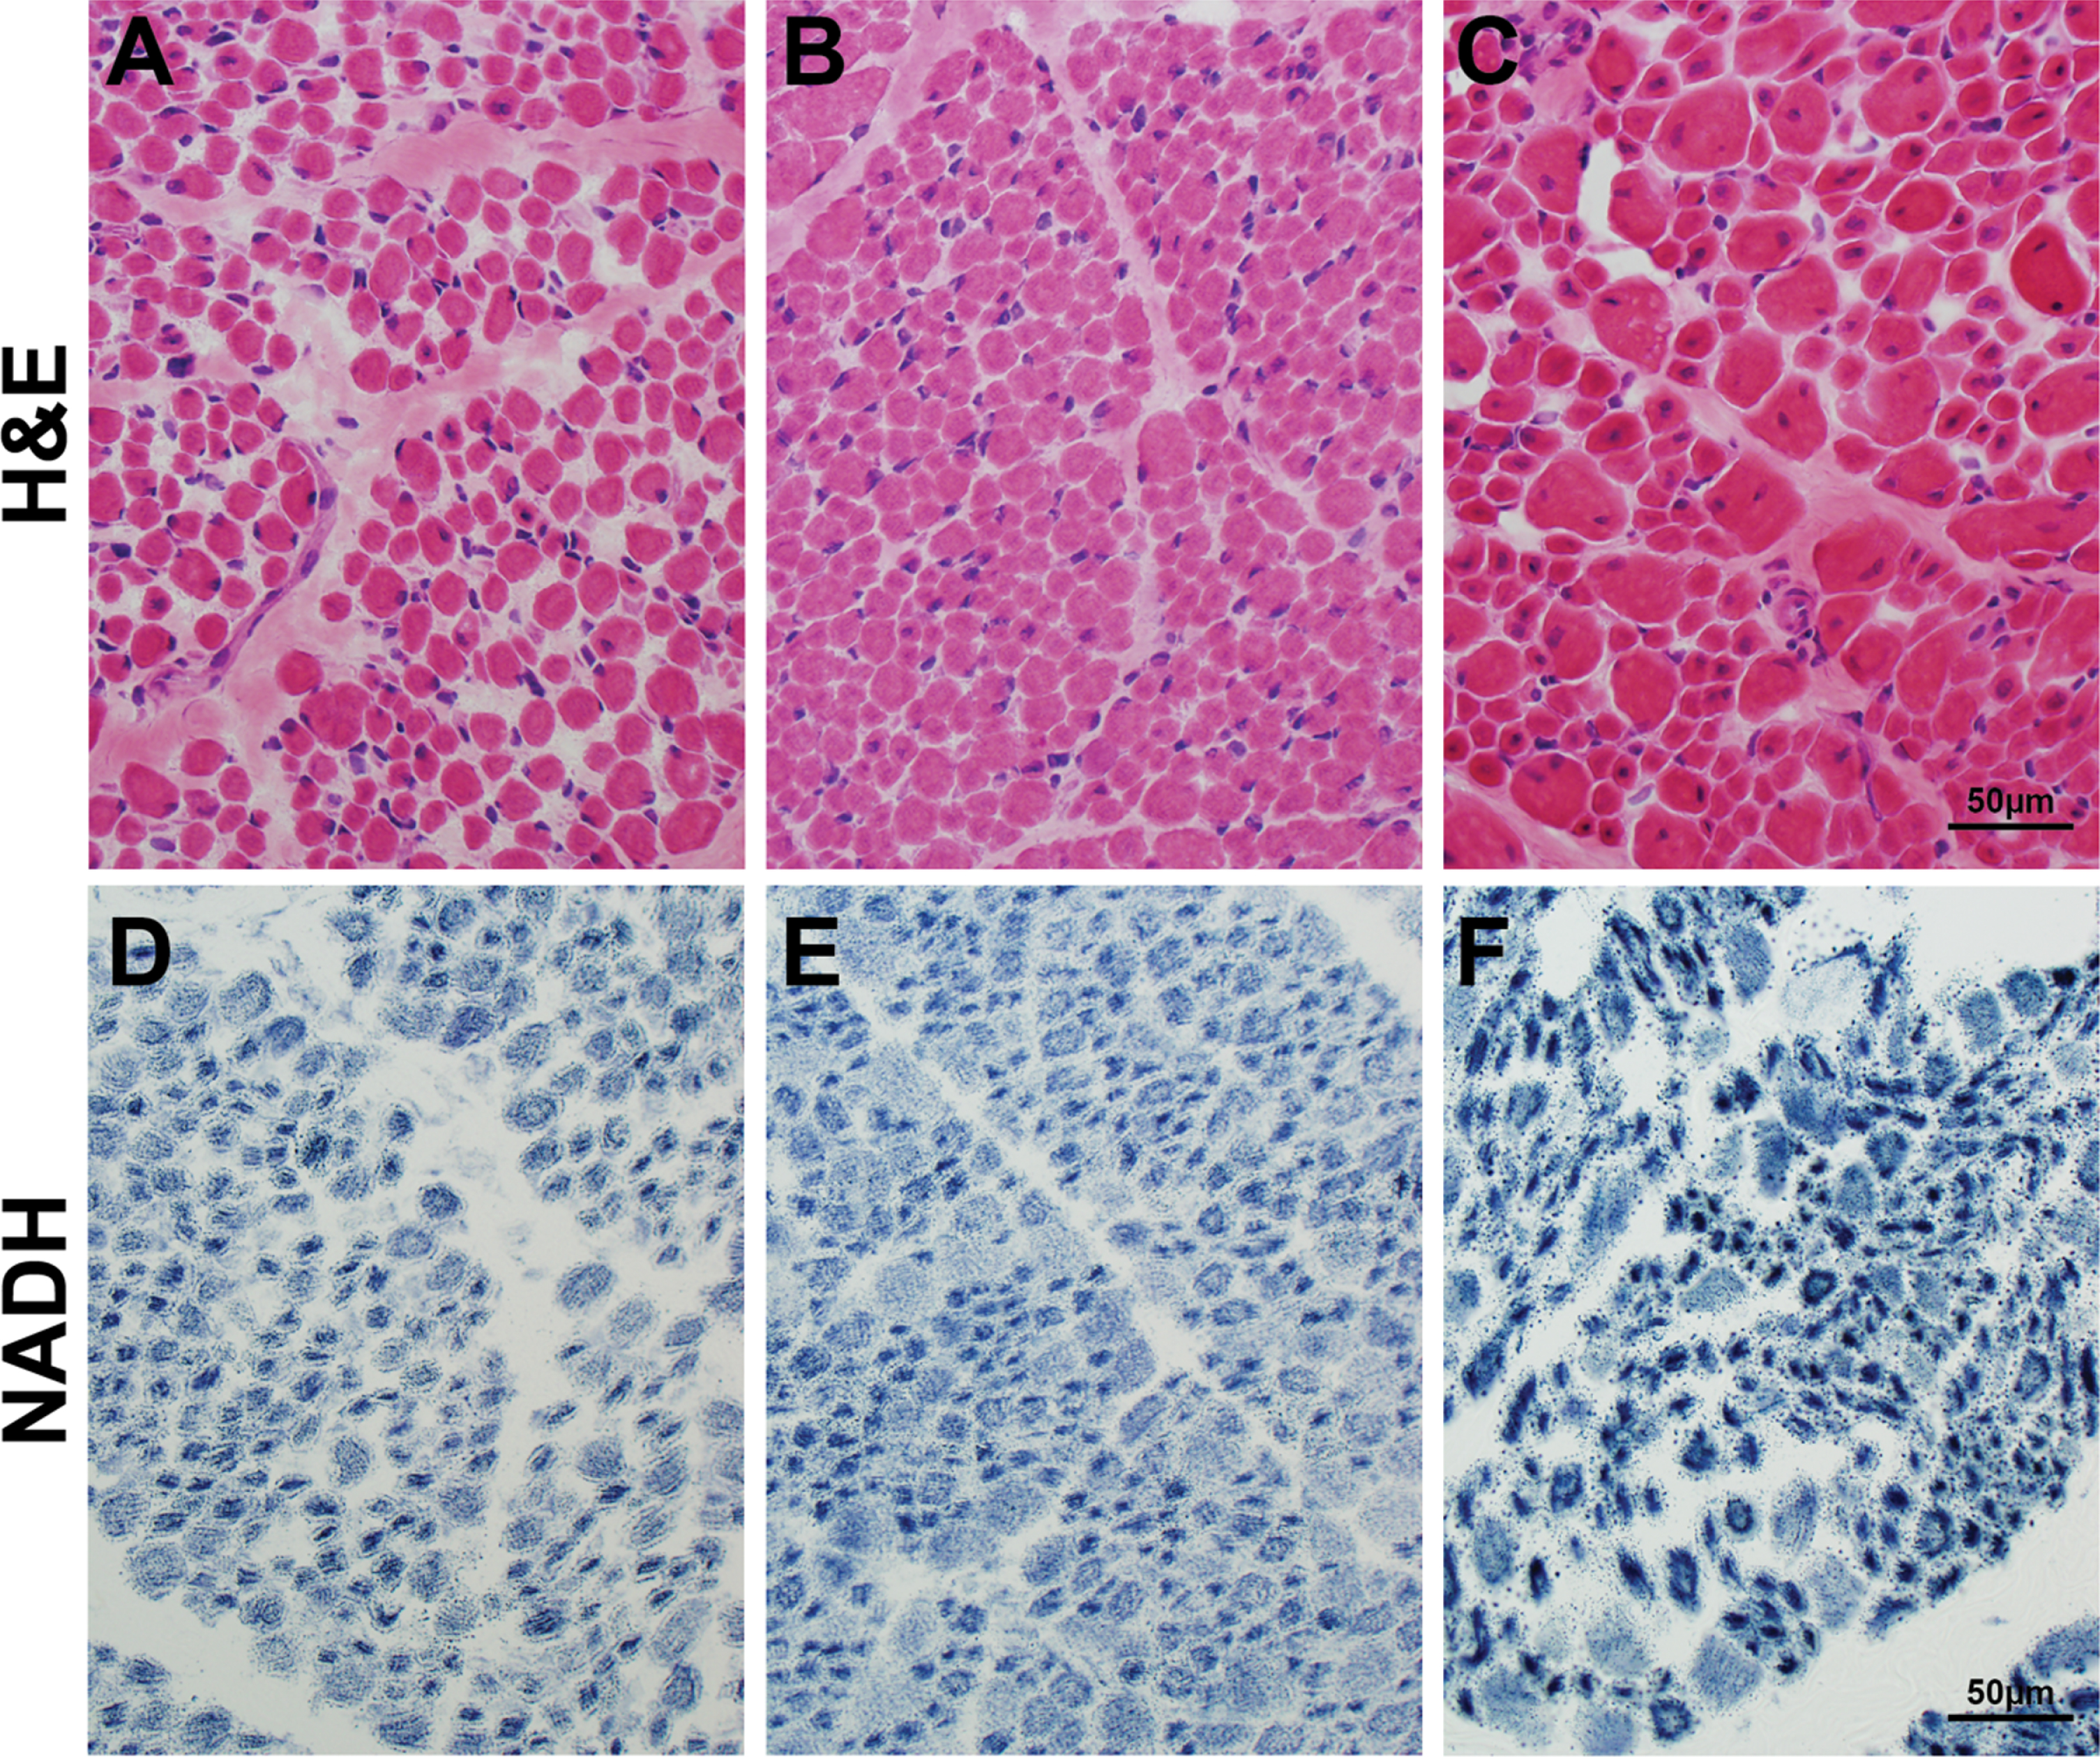 Muscle histopathology in autopsy tissue from patients with liver disease. Skeletal muscle tissue taken at autopsy from patients in the Congenital Muscle Disease Tissue Repository who showed variable degrees of liver pathology. H&E staining (A-C) reveals similar pathology that is characteristic of XLMTM, including myofiber smallness and increased numbers of fibers with internal nucleation, in the absence of inflammation or active myofiber degeneration. NADH staining (D-F) shows a pattern of organelle mislocalization that is characteristic of XLMTM in humans, with central aggregation of mitochondria and sarcotubular elements surrounded by an area of absent staining in the subsarcolemmal region. The muscle pathology findings in these three cases are extremely similar, despite differential levels of liver disease in these patients. One patient (panels A, D) had no histological evidence of liver disease, one patient (panels B, E) showed intrahepatic cholestasis at autopsy, and one patient (panels C, F) showed hepatic hemorrhage due to presumed hepatic peliosis.